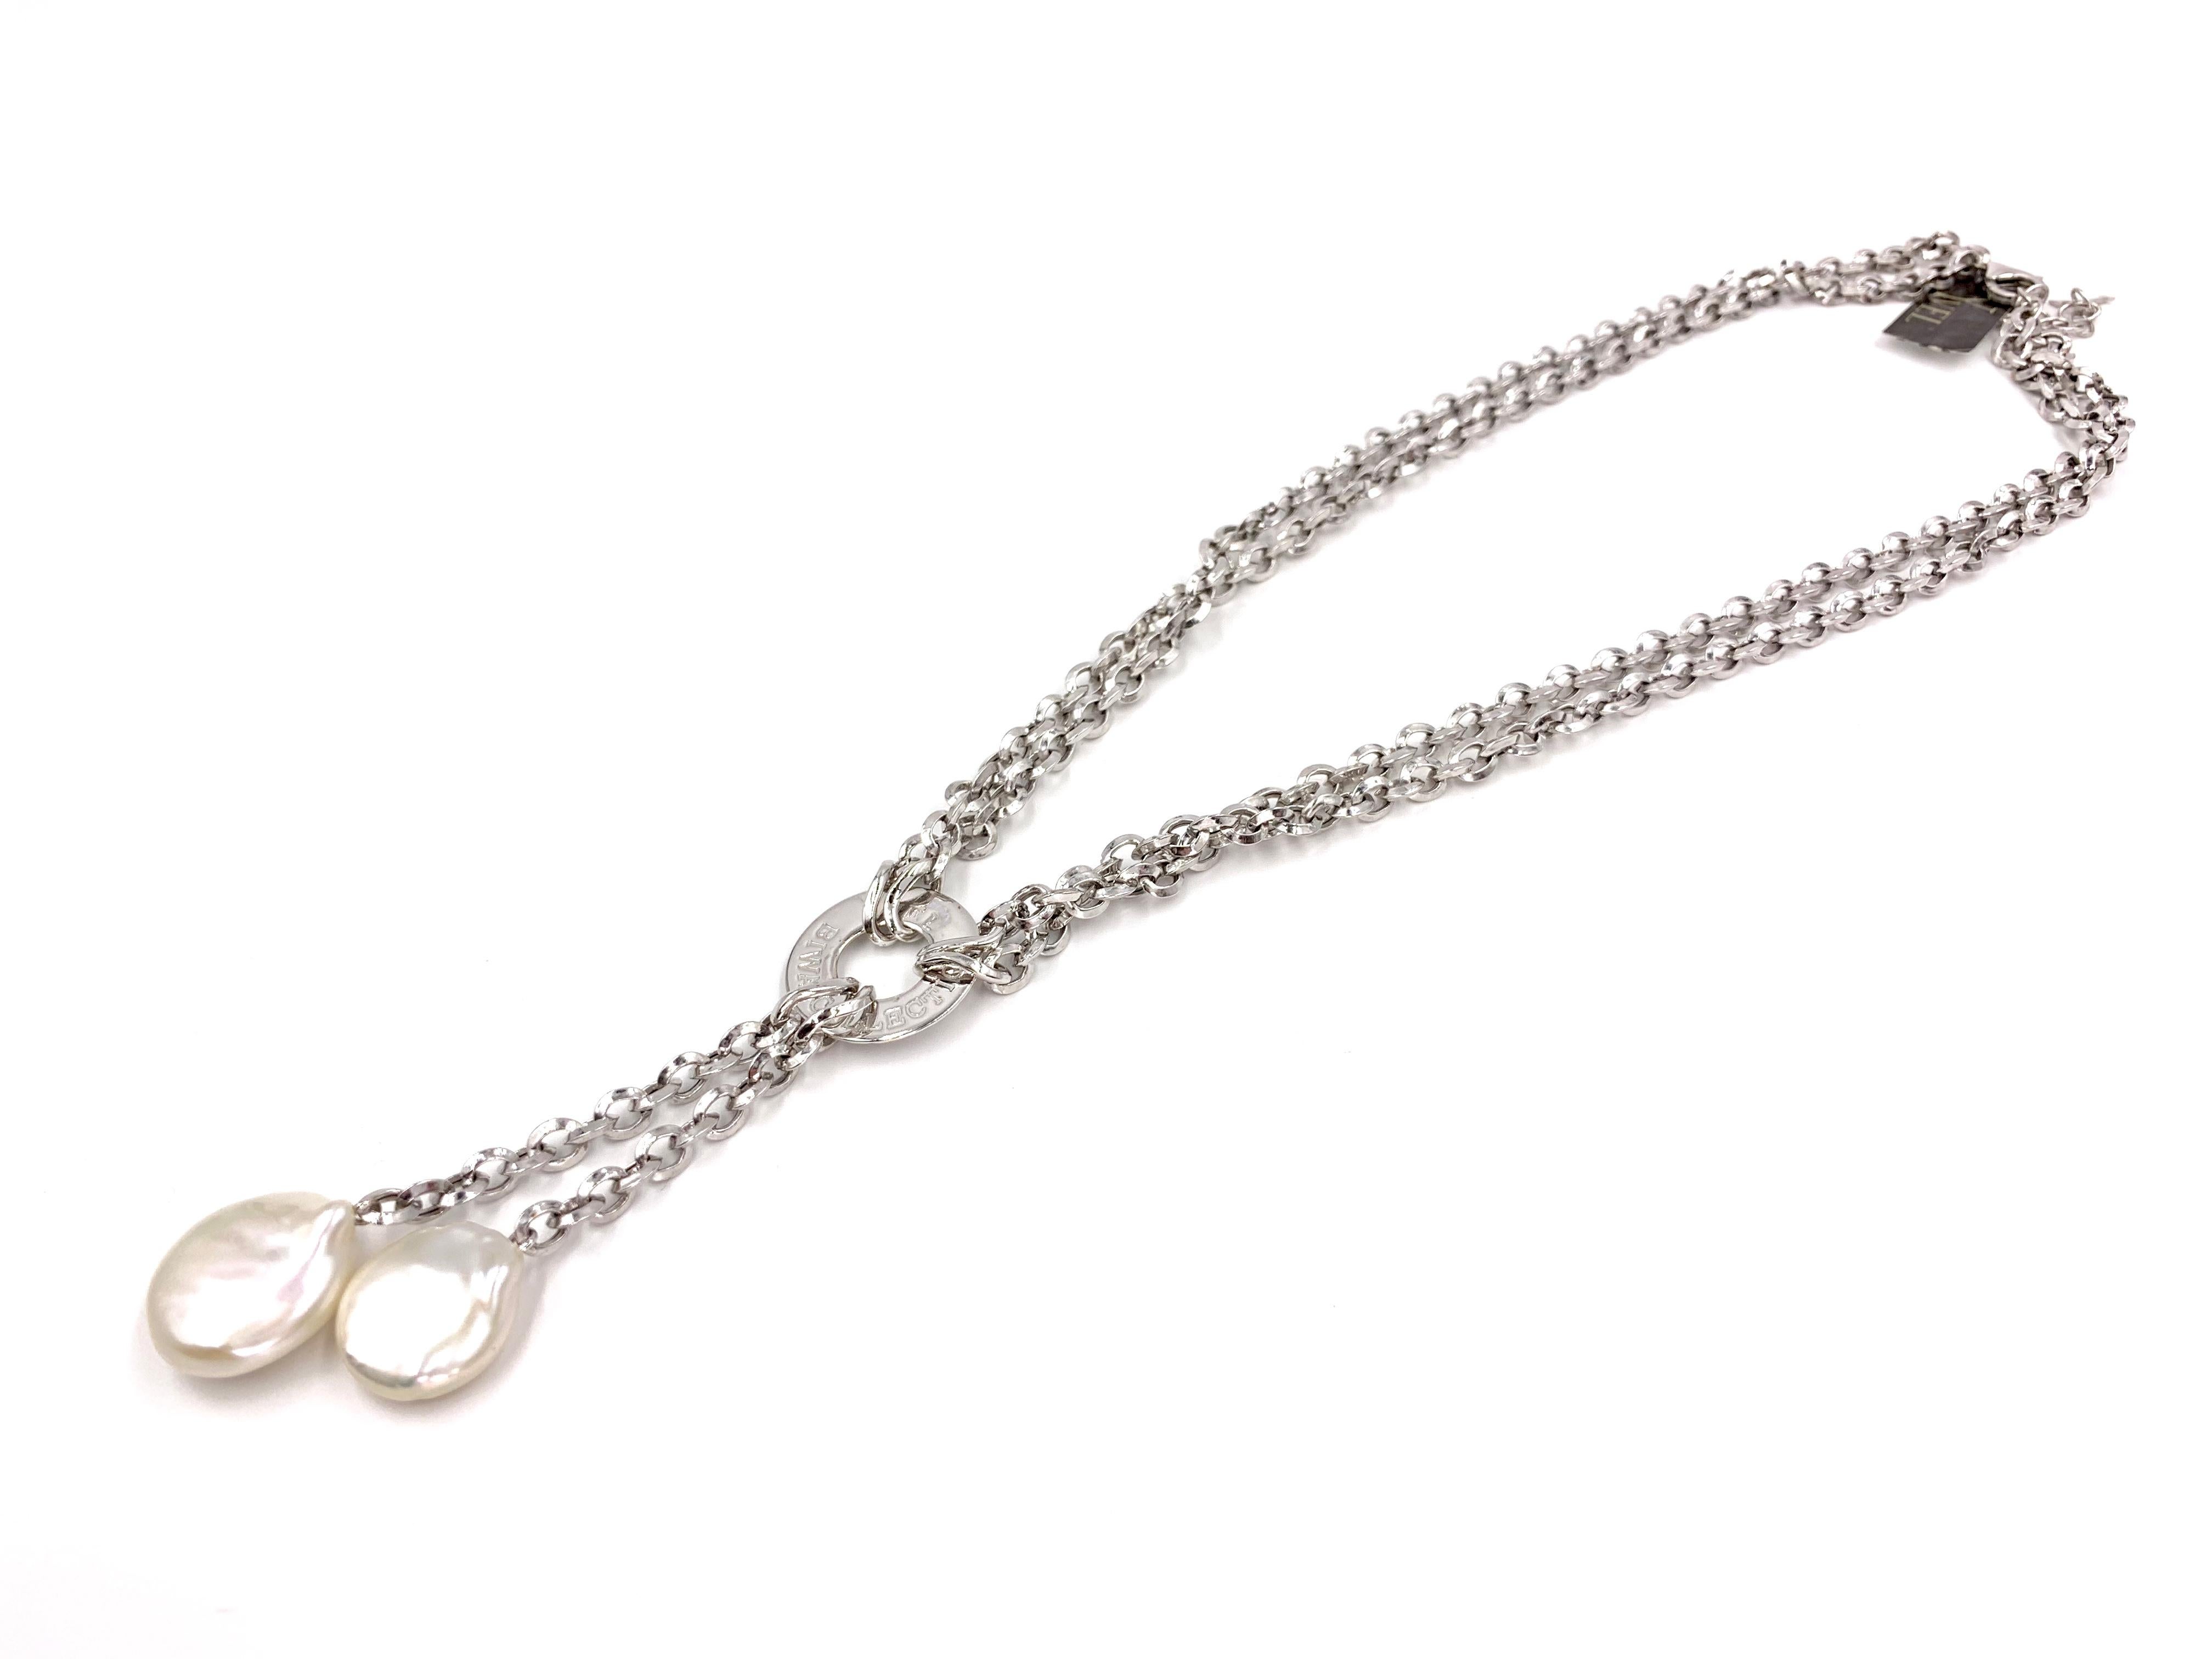 A wearable and fashionable 18 karat white gold double link chain lariat style necklace with two baroque pearls that drop from the center, expertly crafted by leading designers in fine pearl jewelry, Yvel company. Two flat 15mm baroque pearls drop